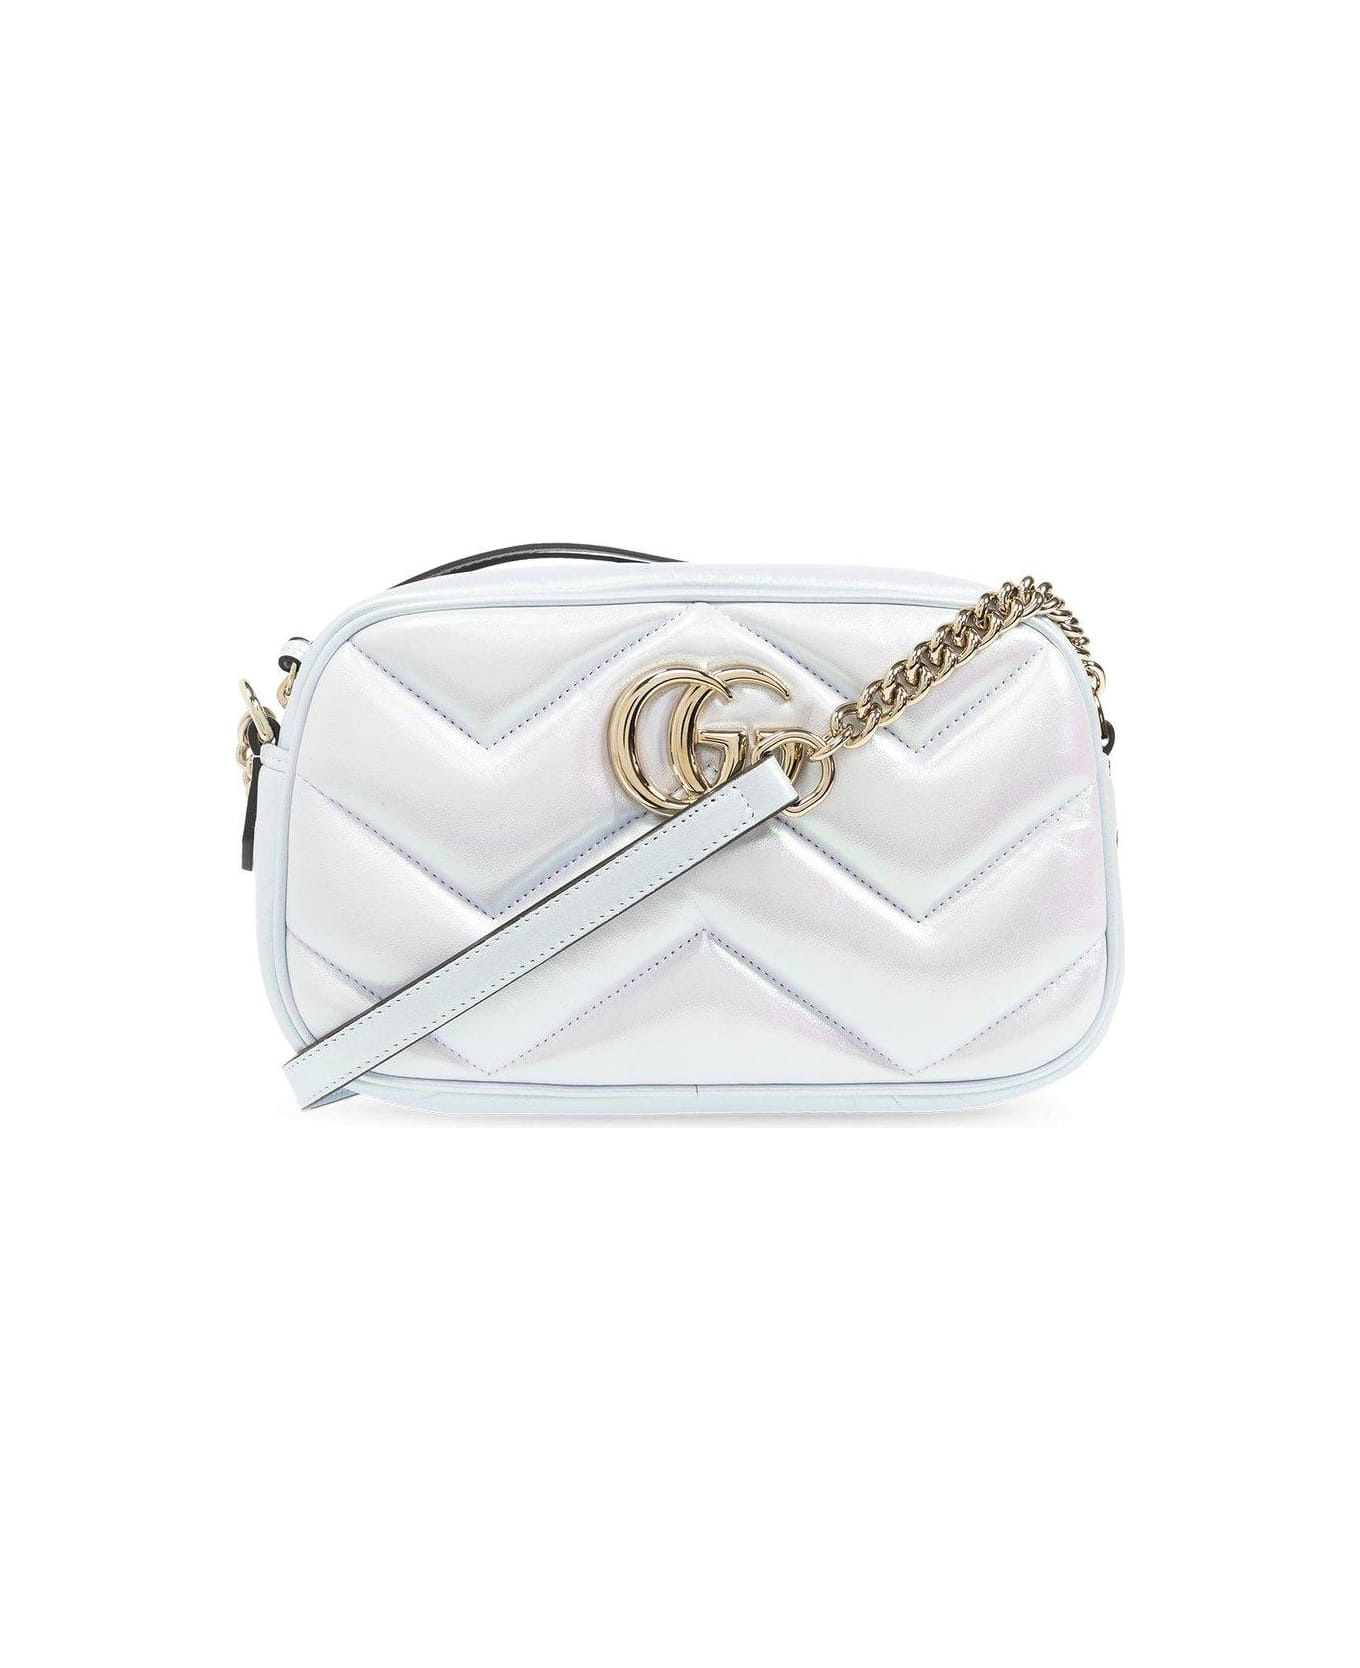 Gg Marmont Small Shoulder Bag - 1